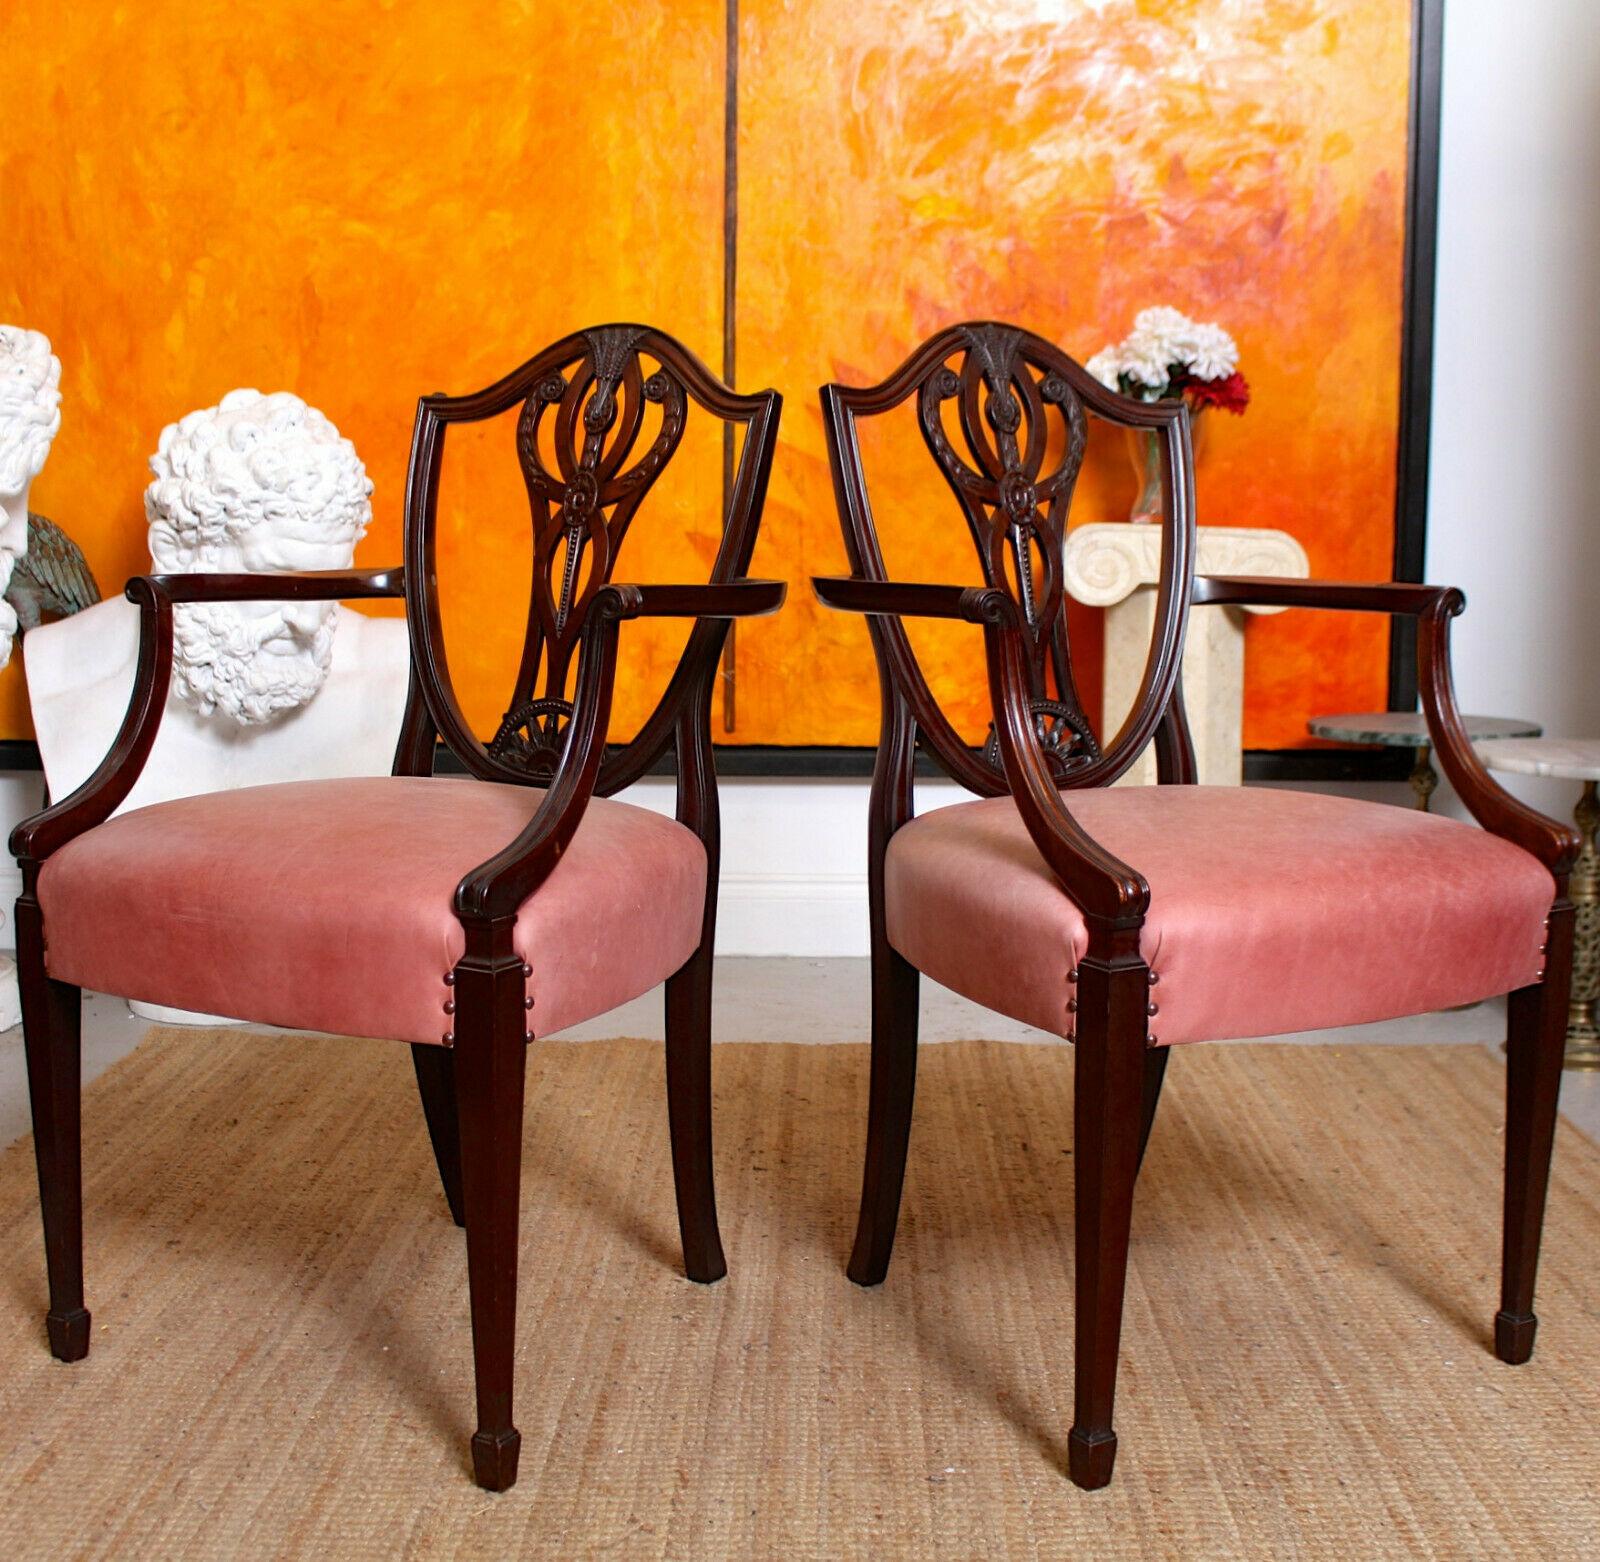 6 English Dining Chairs Hepplewhite Mahogany Leather, 19th Century For Sale 6